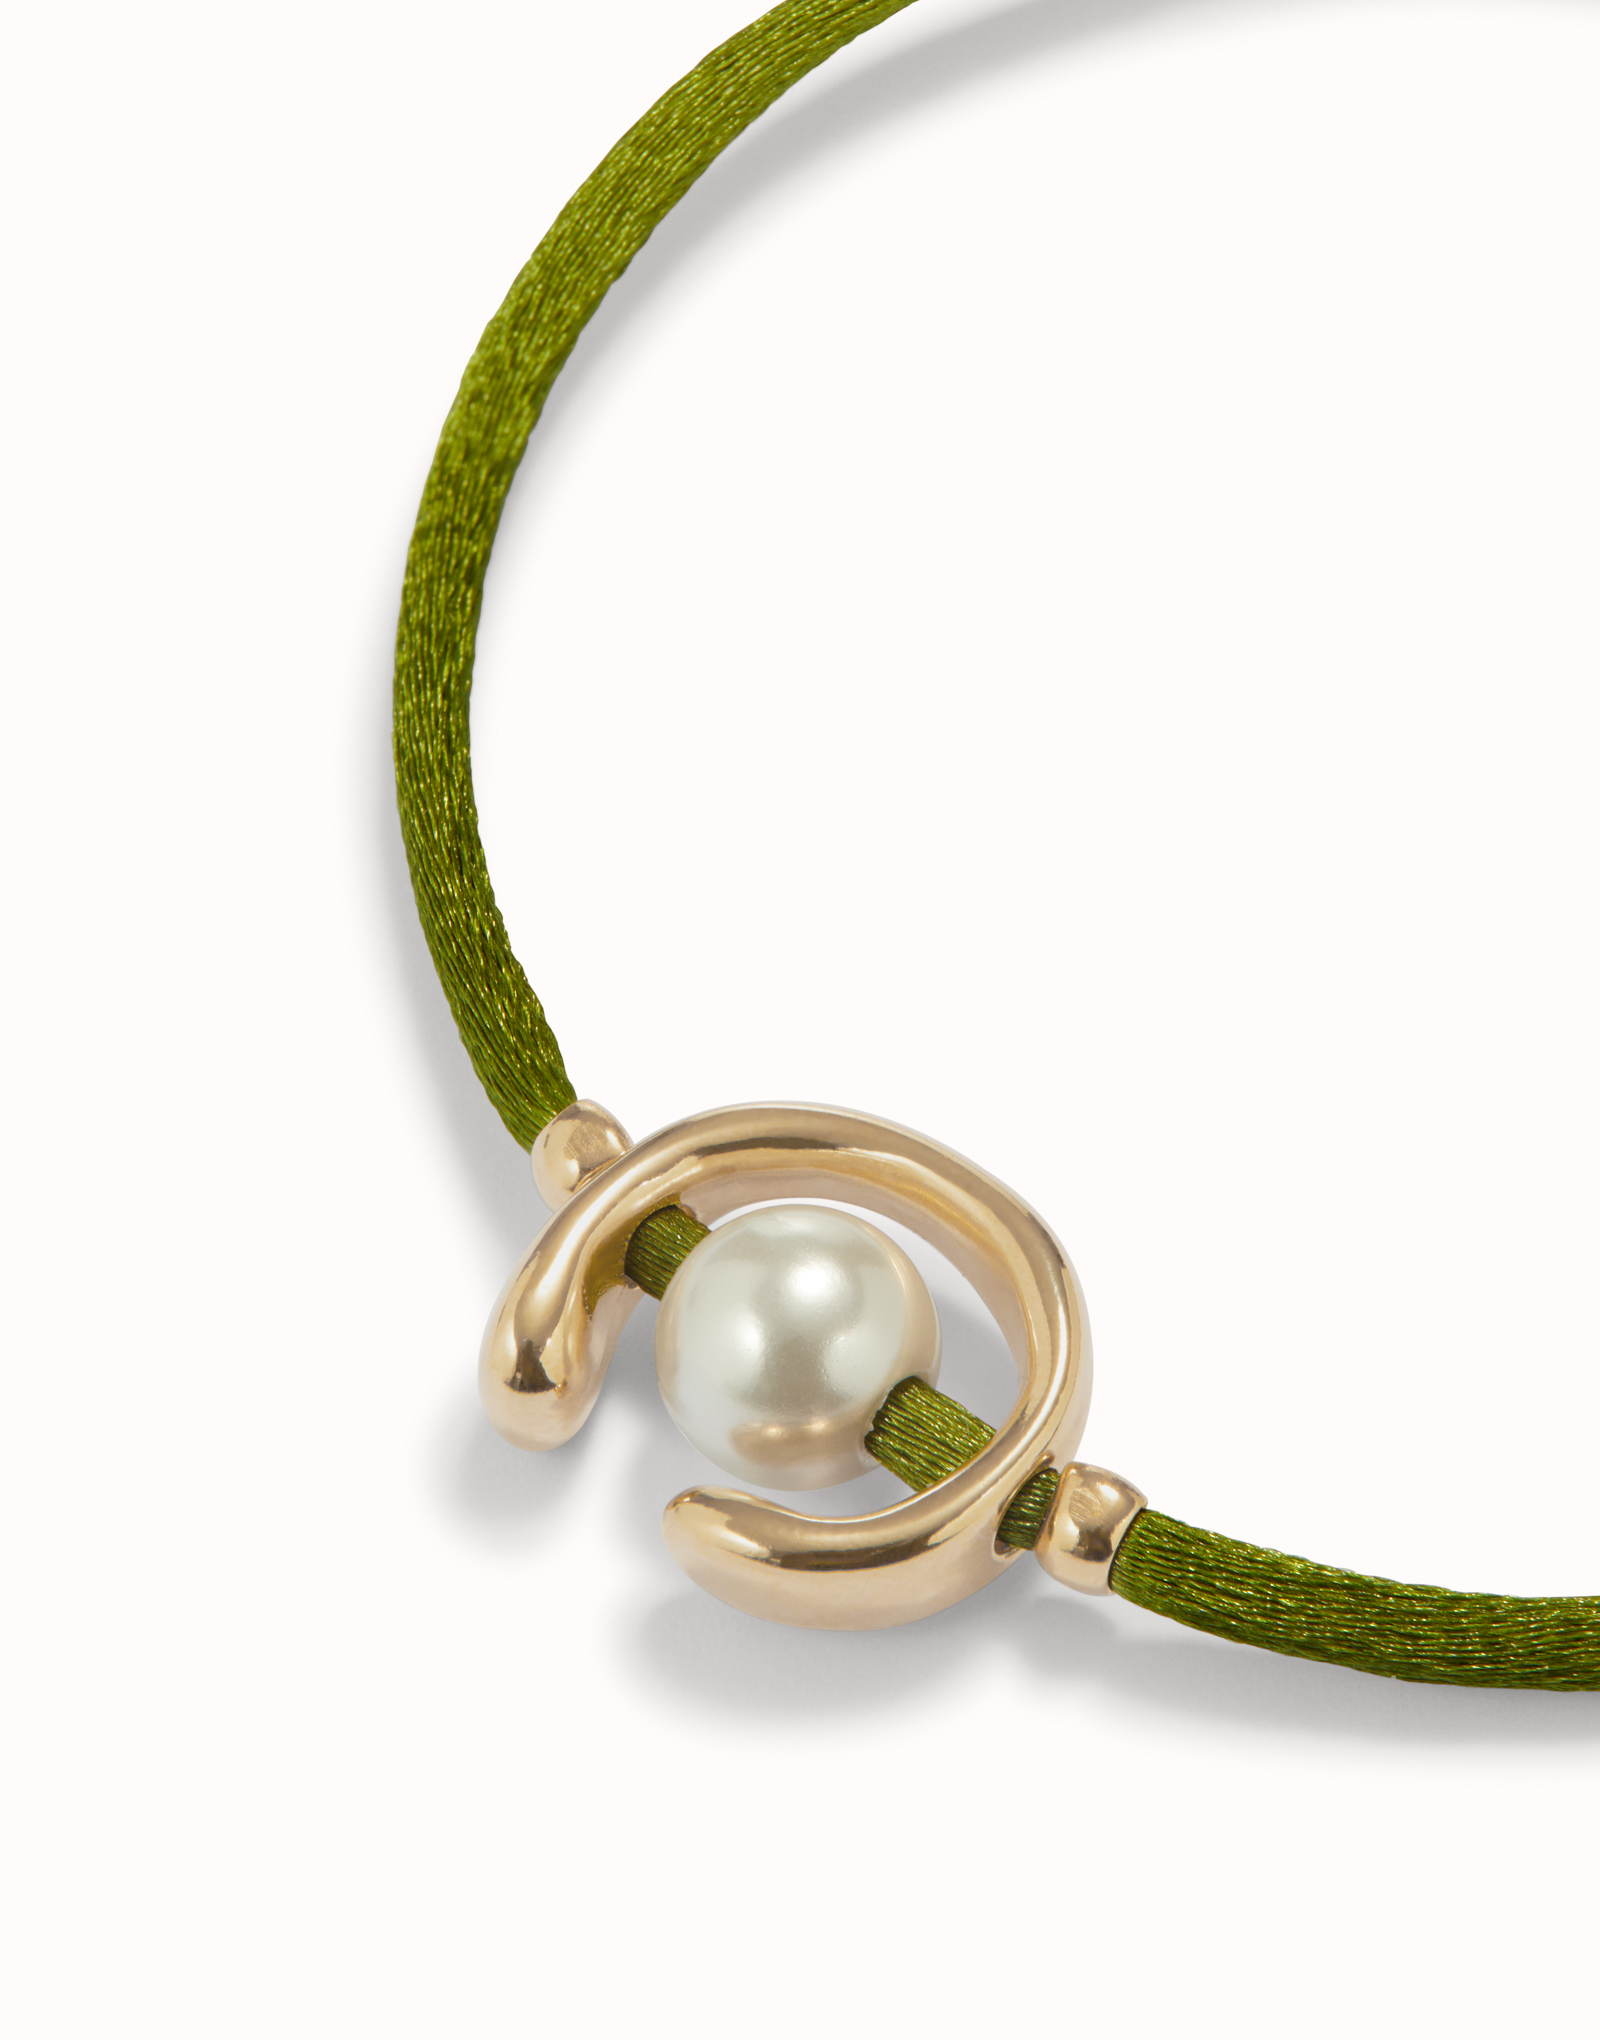 18K gold-plated dark green thread bracelet with shell pearl accessory., Golden, large image number null